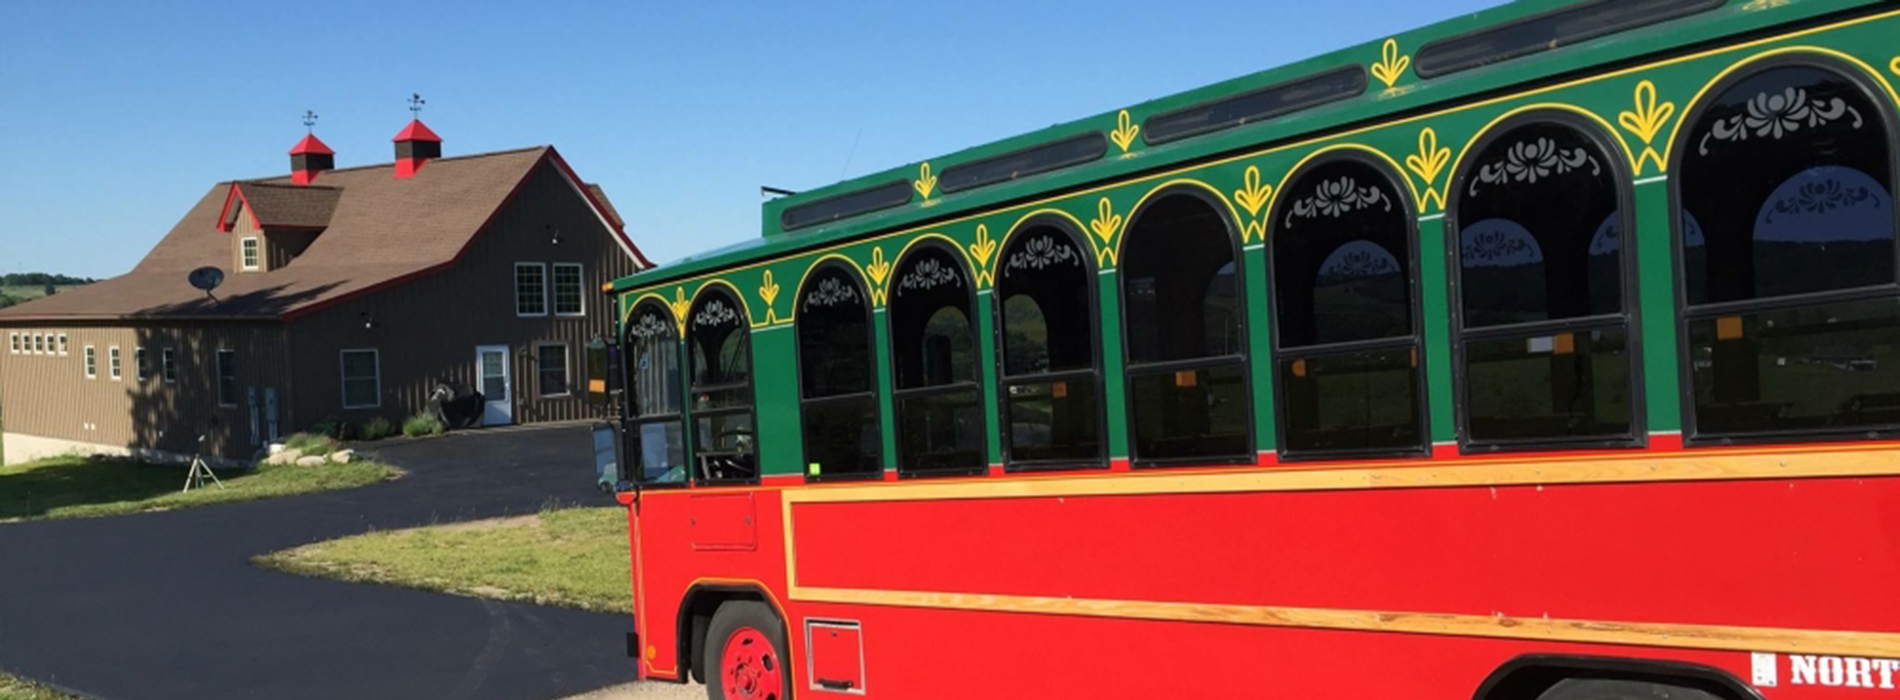 Trolleys provide a great way to experience Michigan while touring Michigan wineries. We offer both scheduled Wine Tours and Private Tours for your group.